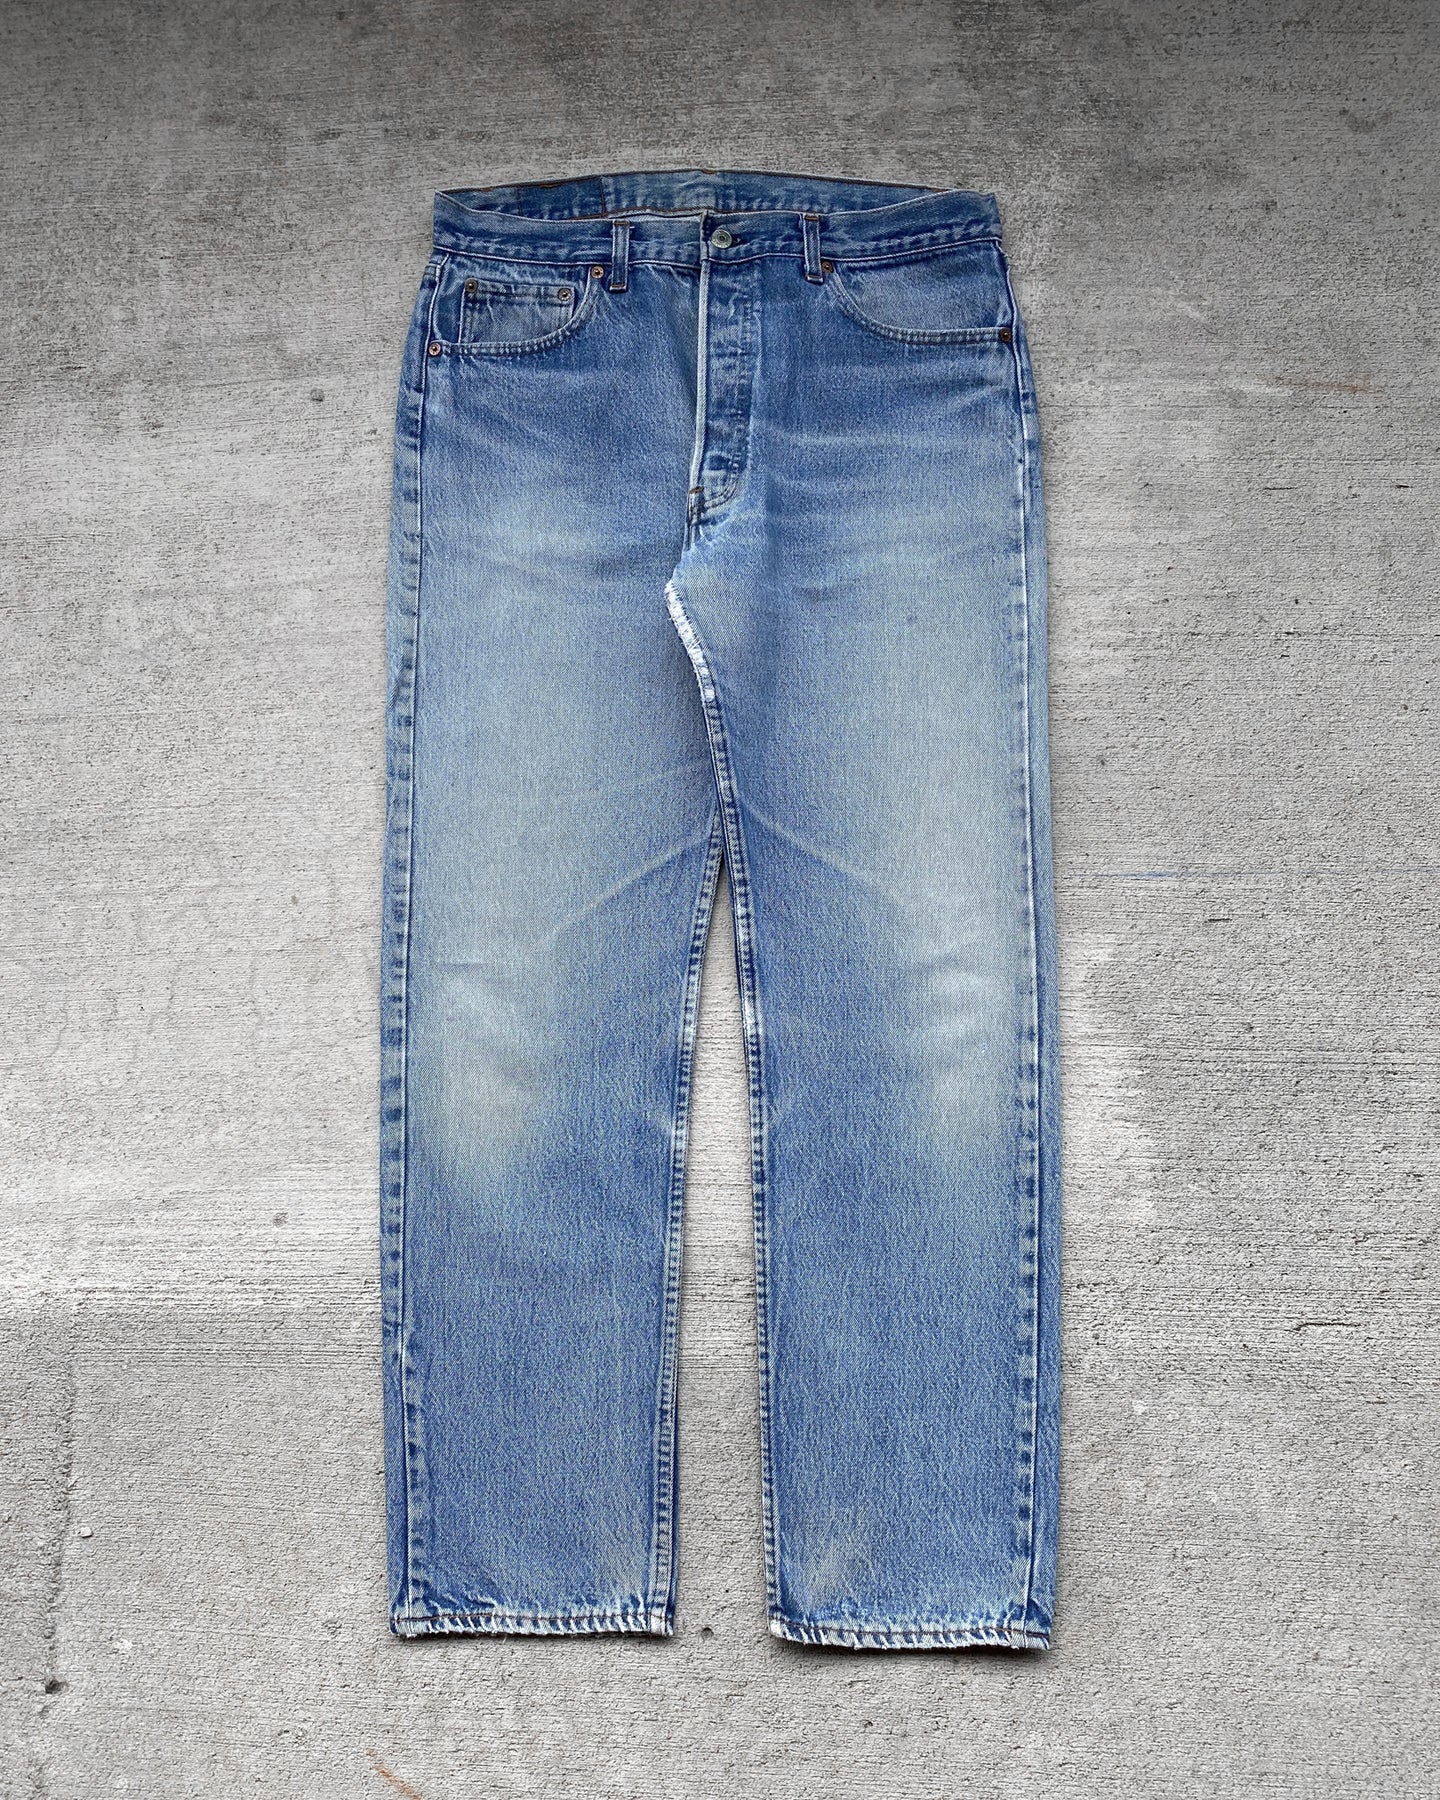 1980s Levi's Well Worn 501 - Size 35 x 31